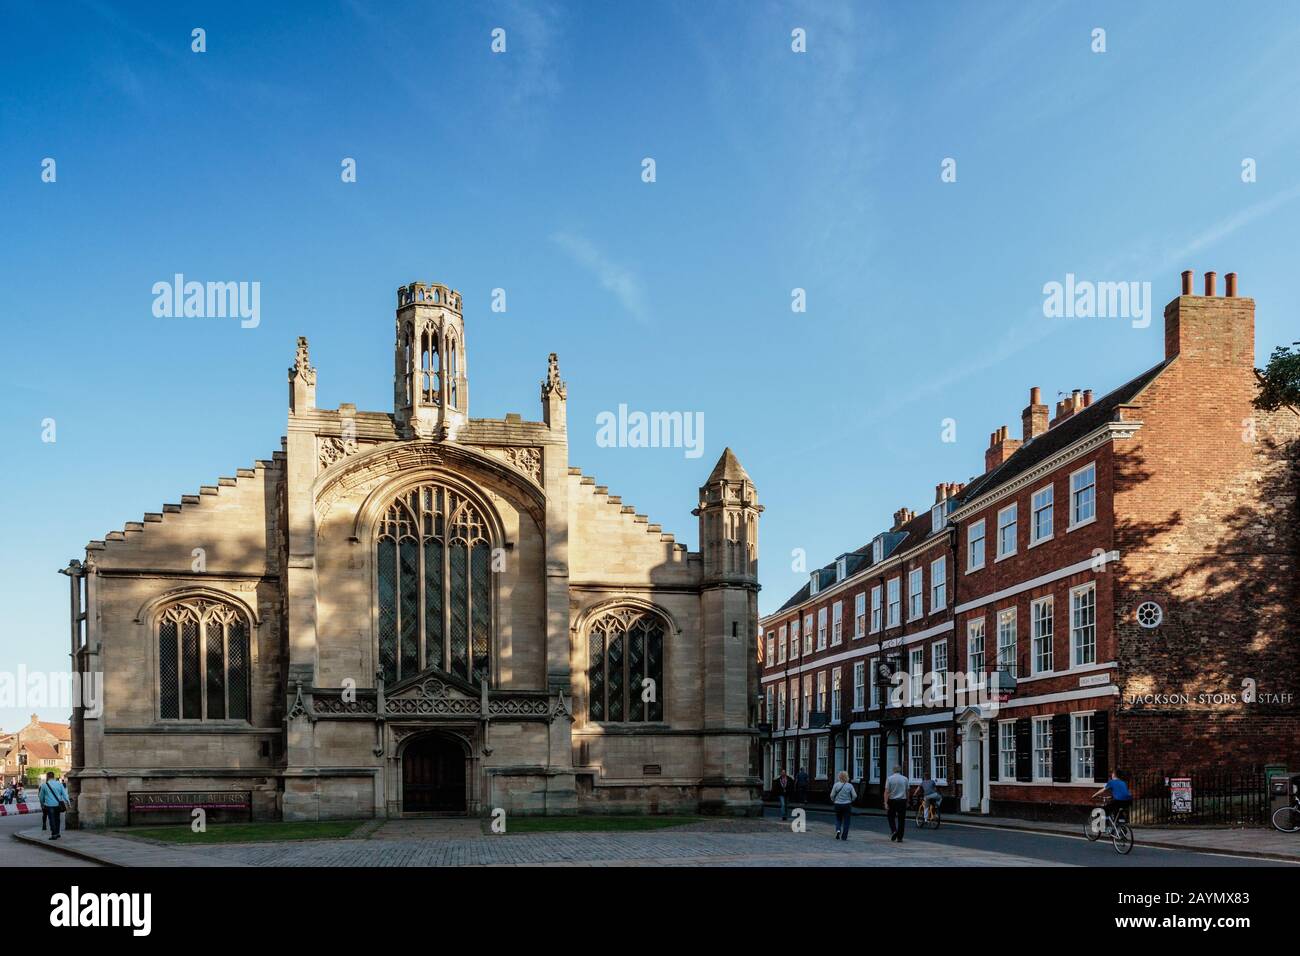 St Michael le Belfrey is an Anglican Church in York, England. It is situated directly next to York Minster in the centre of the city. Stock Photo